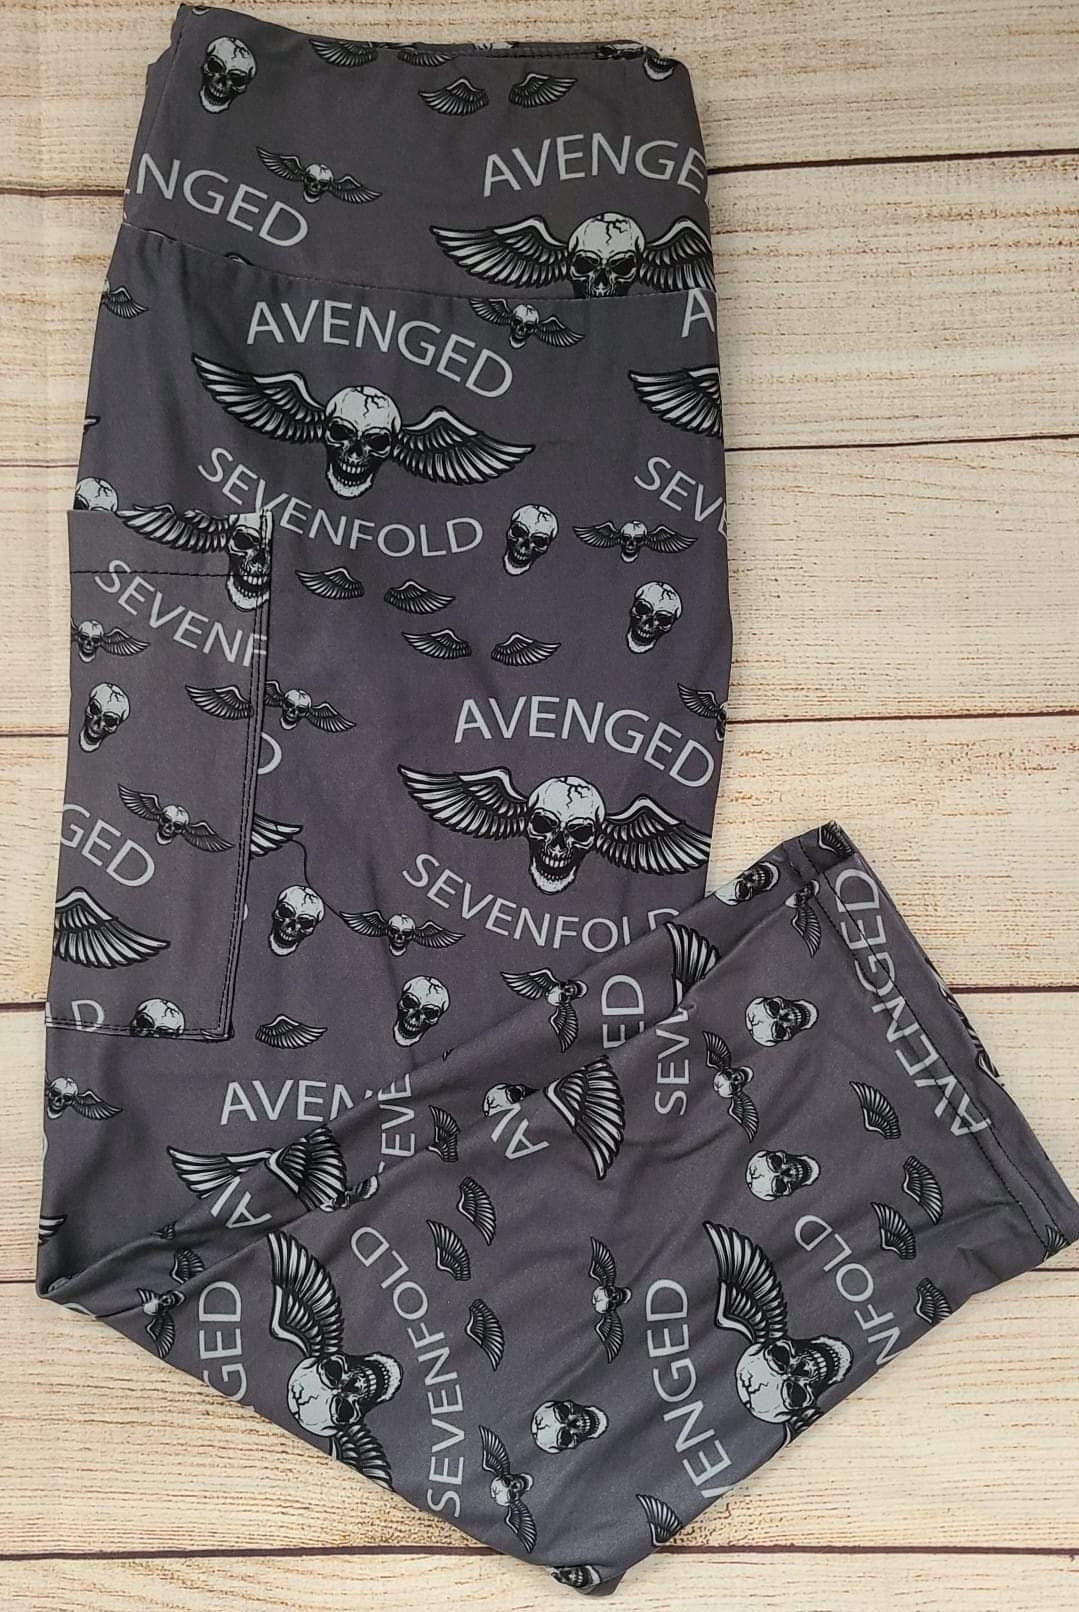 Avenged with pockets leggings and capris